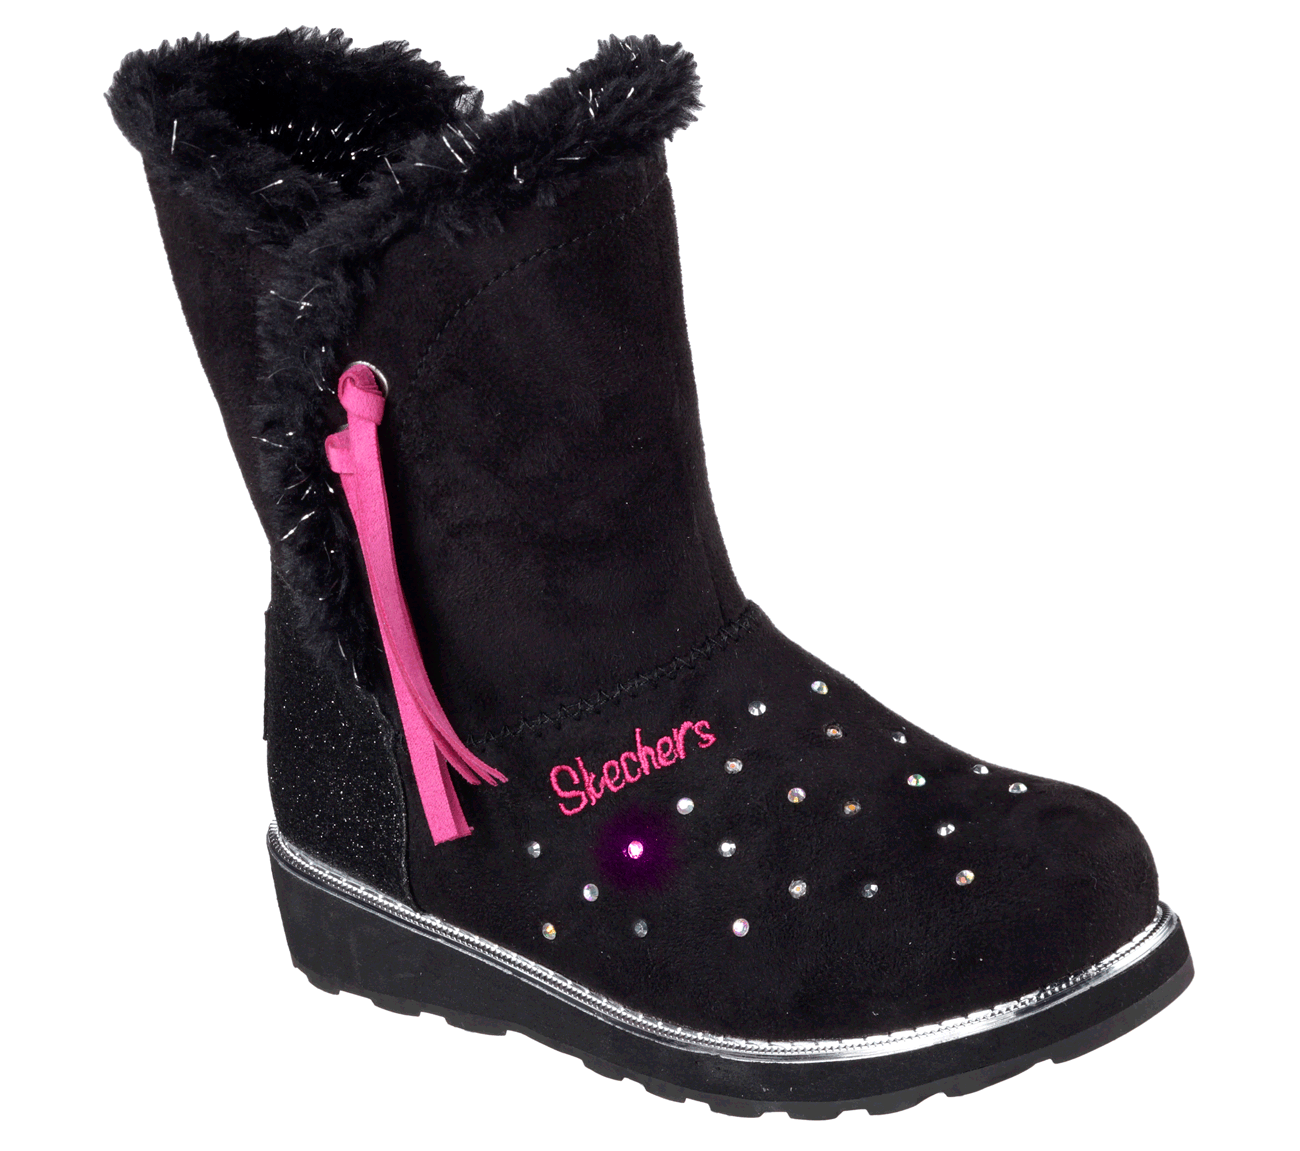 Sparkle Spell SKECHERS Twinkle Toes Shoes